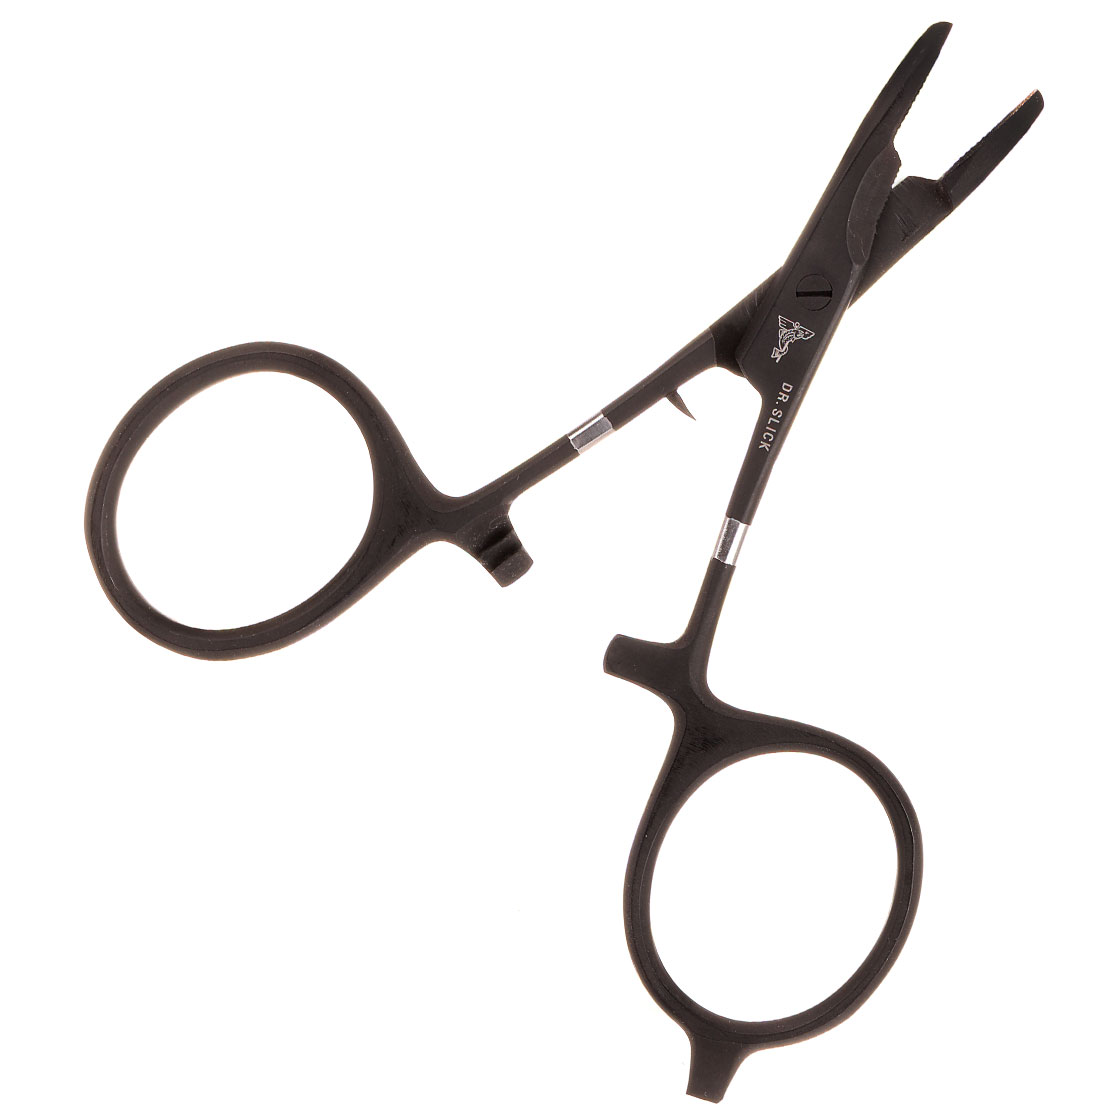 Dr Slick Mitten/Scissor Clamp • Fly Fishing Outfitters